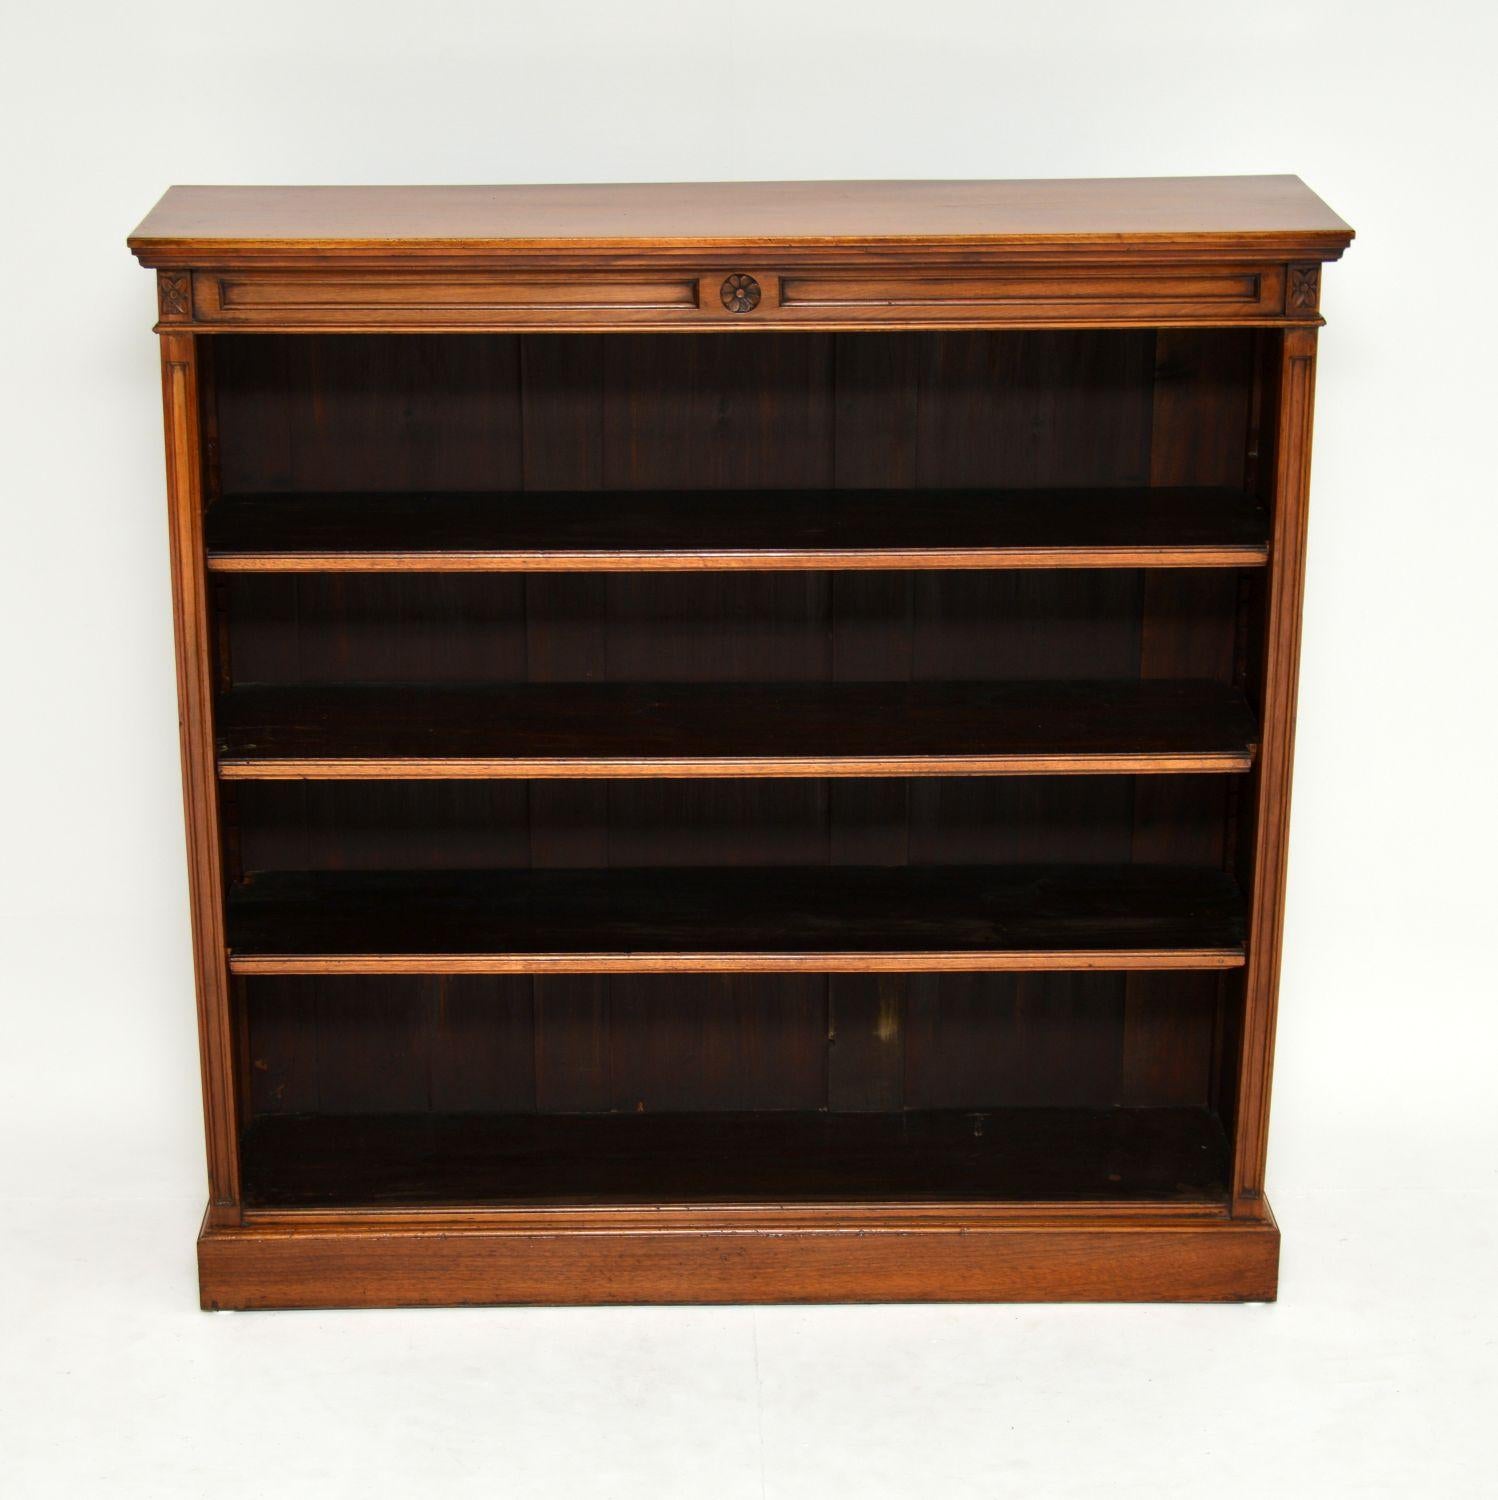 This antique solid walnut open bookcase is fairly large, so will hold a lot of books.

It’s late Victorian, dating to around the 1880s period and is in very good original condition.

This bookcase has a panelled top and sides, with some carved